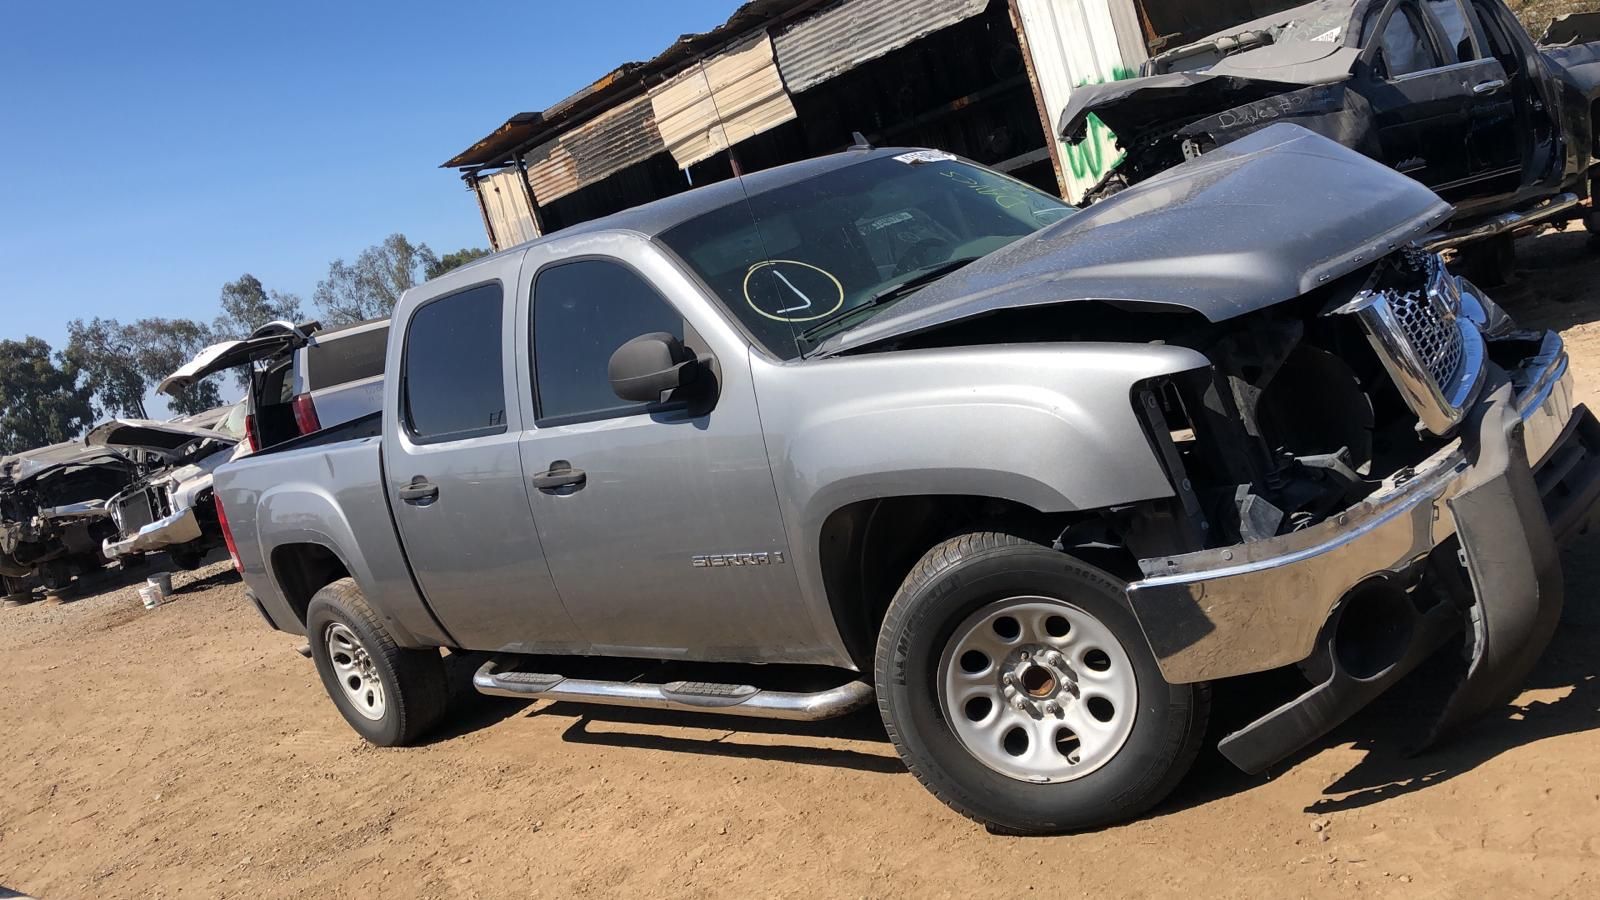 2007 GMC Sierra for parts only